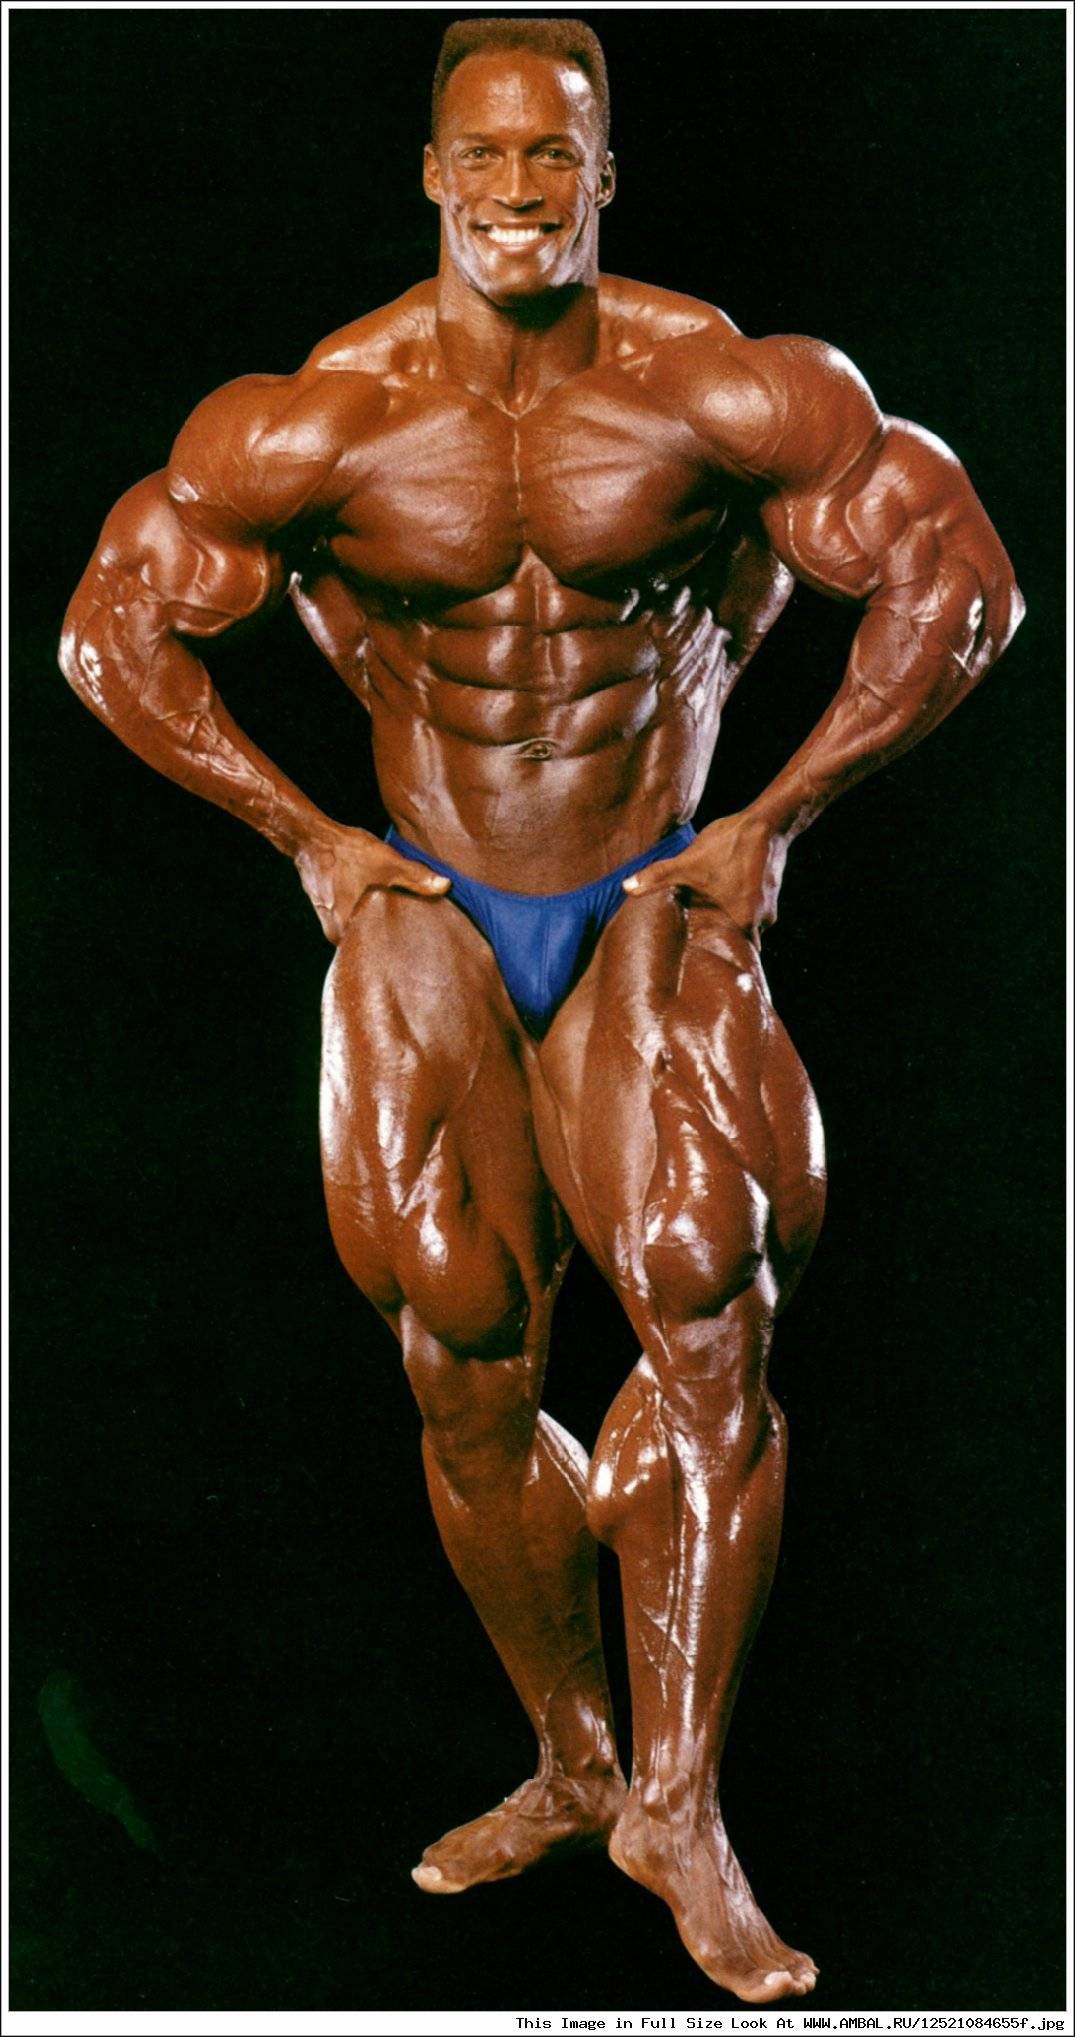 Shawn ray - greatest physiques